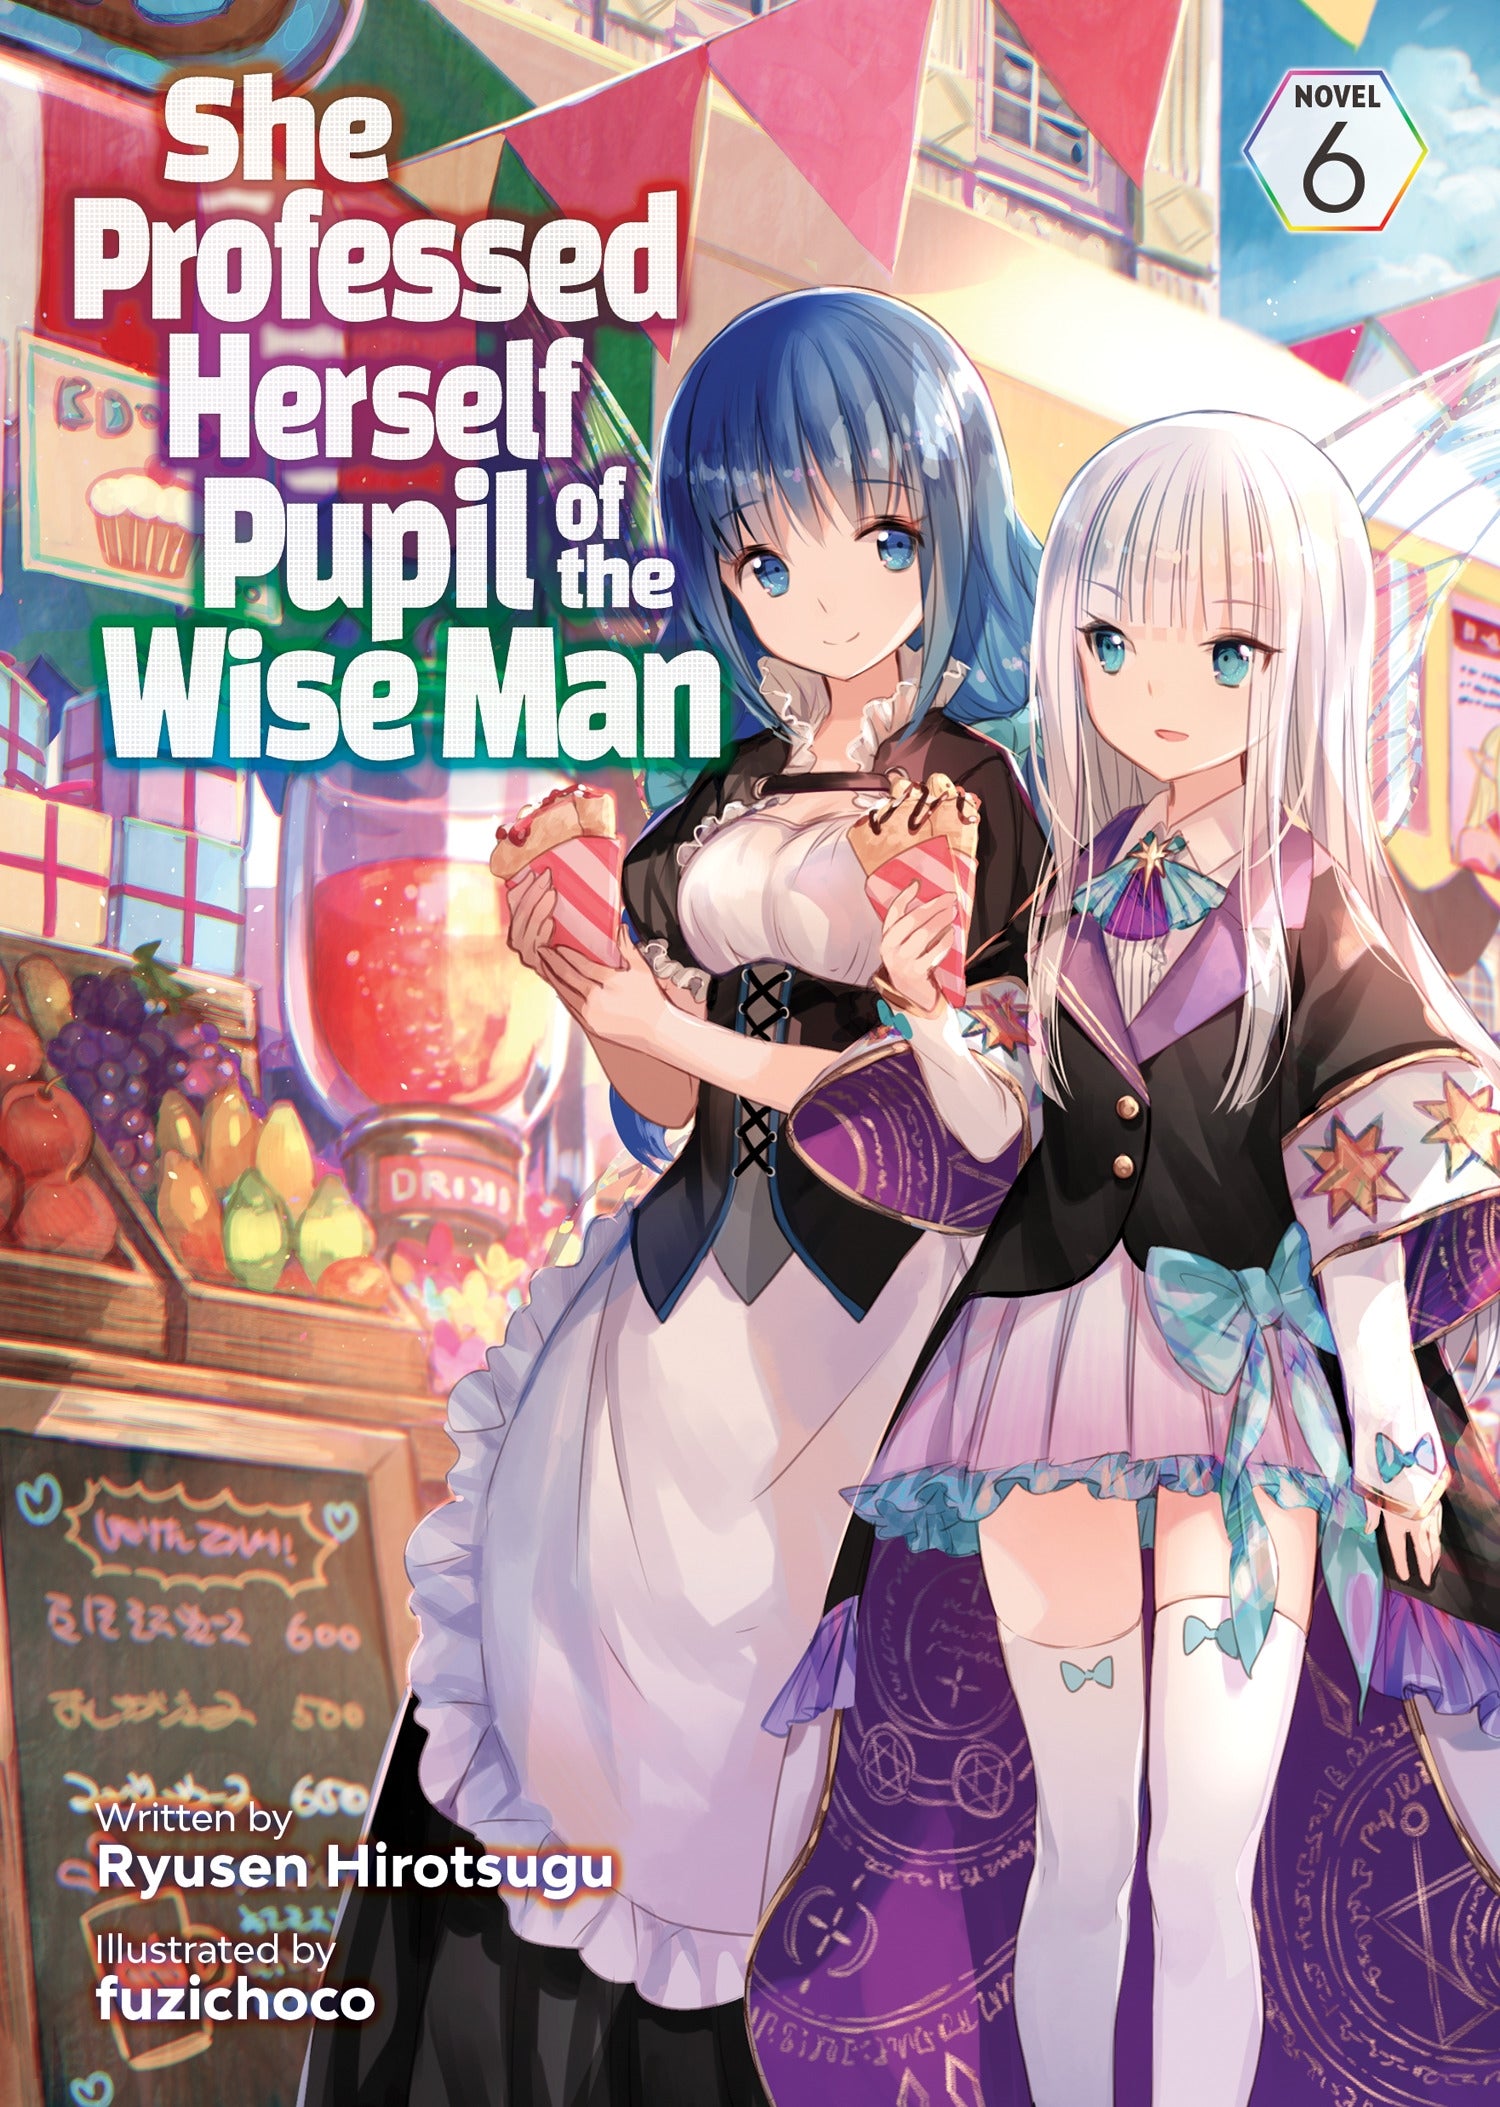 She Professed Herself Pupil of the Wise Man (Light Novel) - Vol. 6